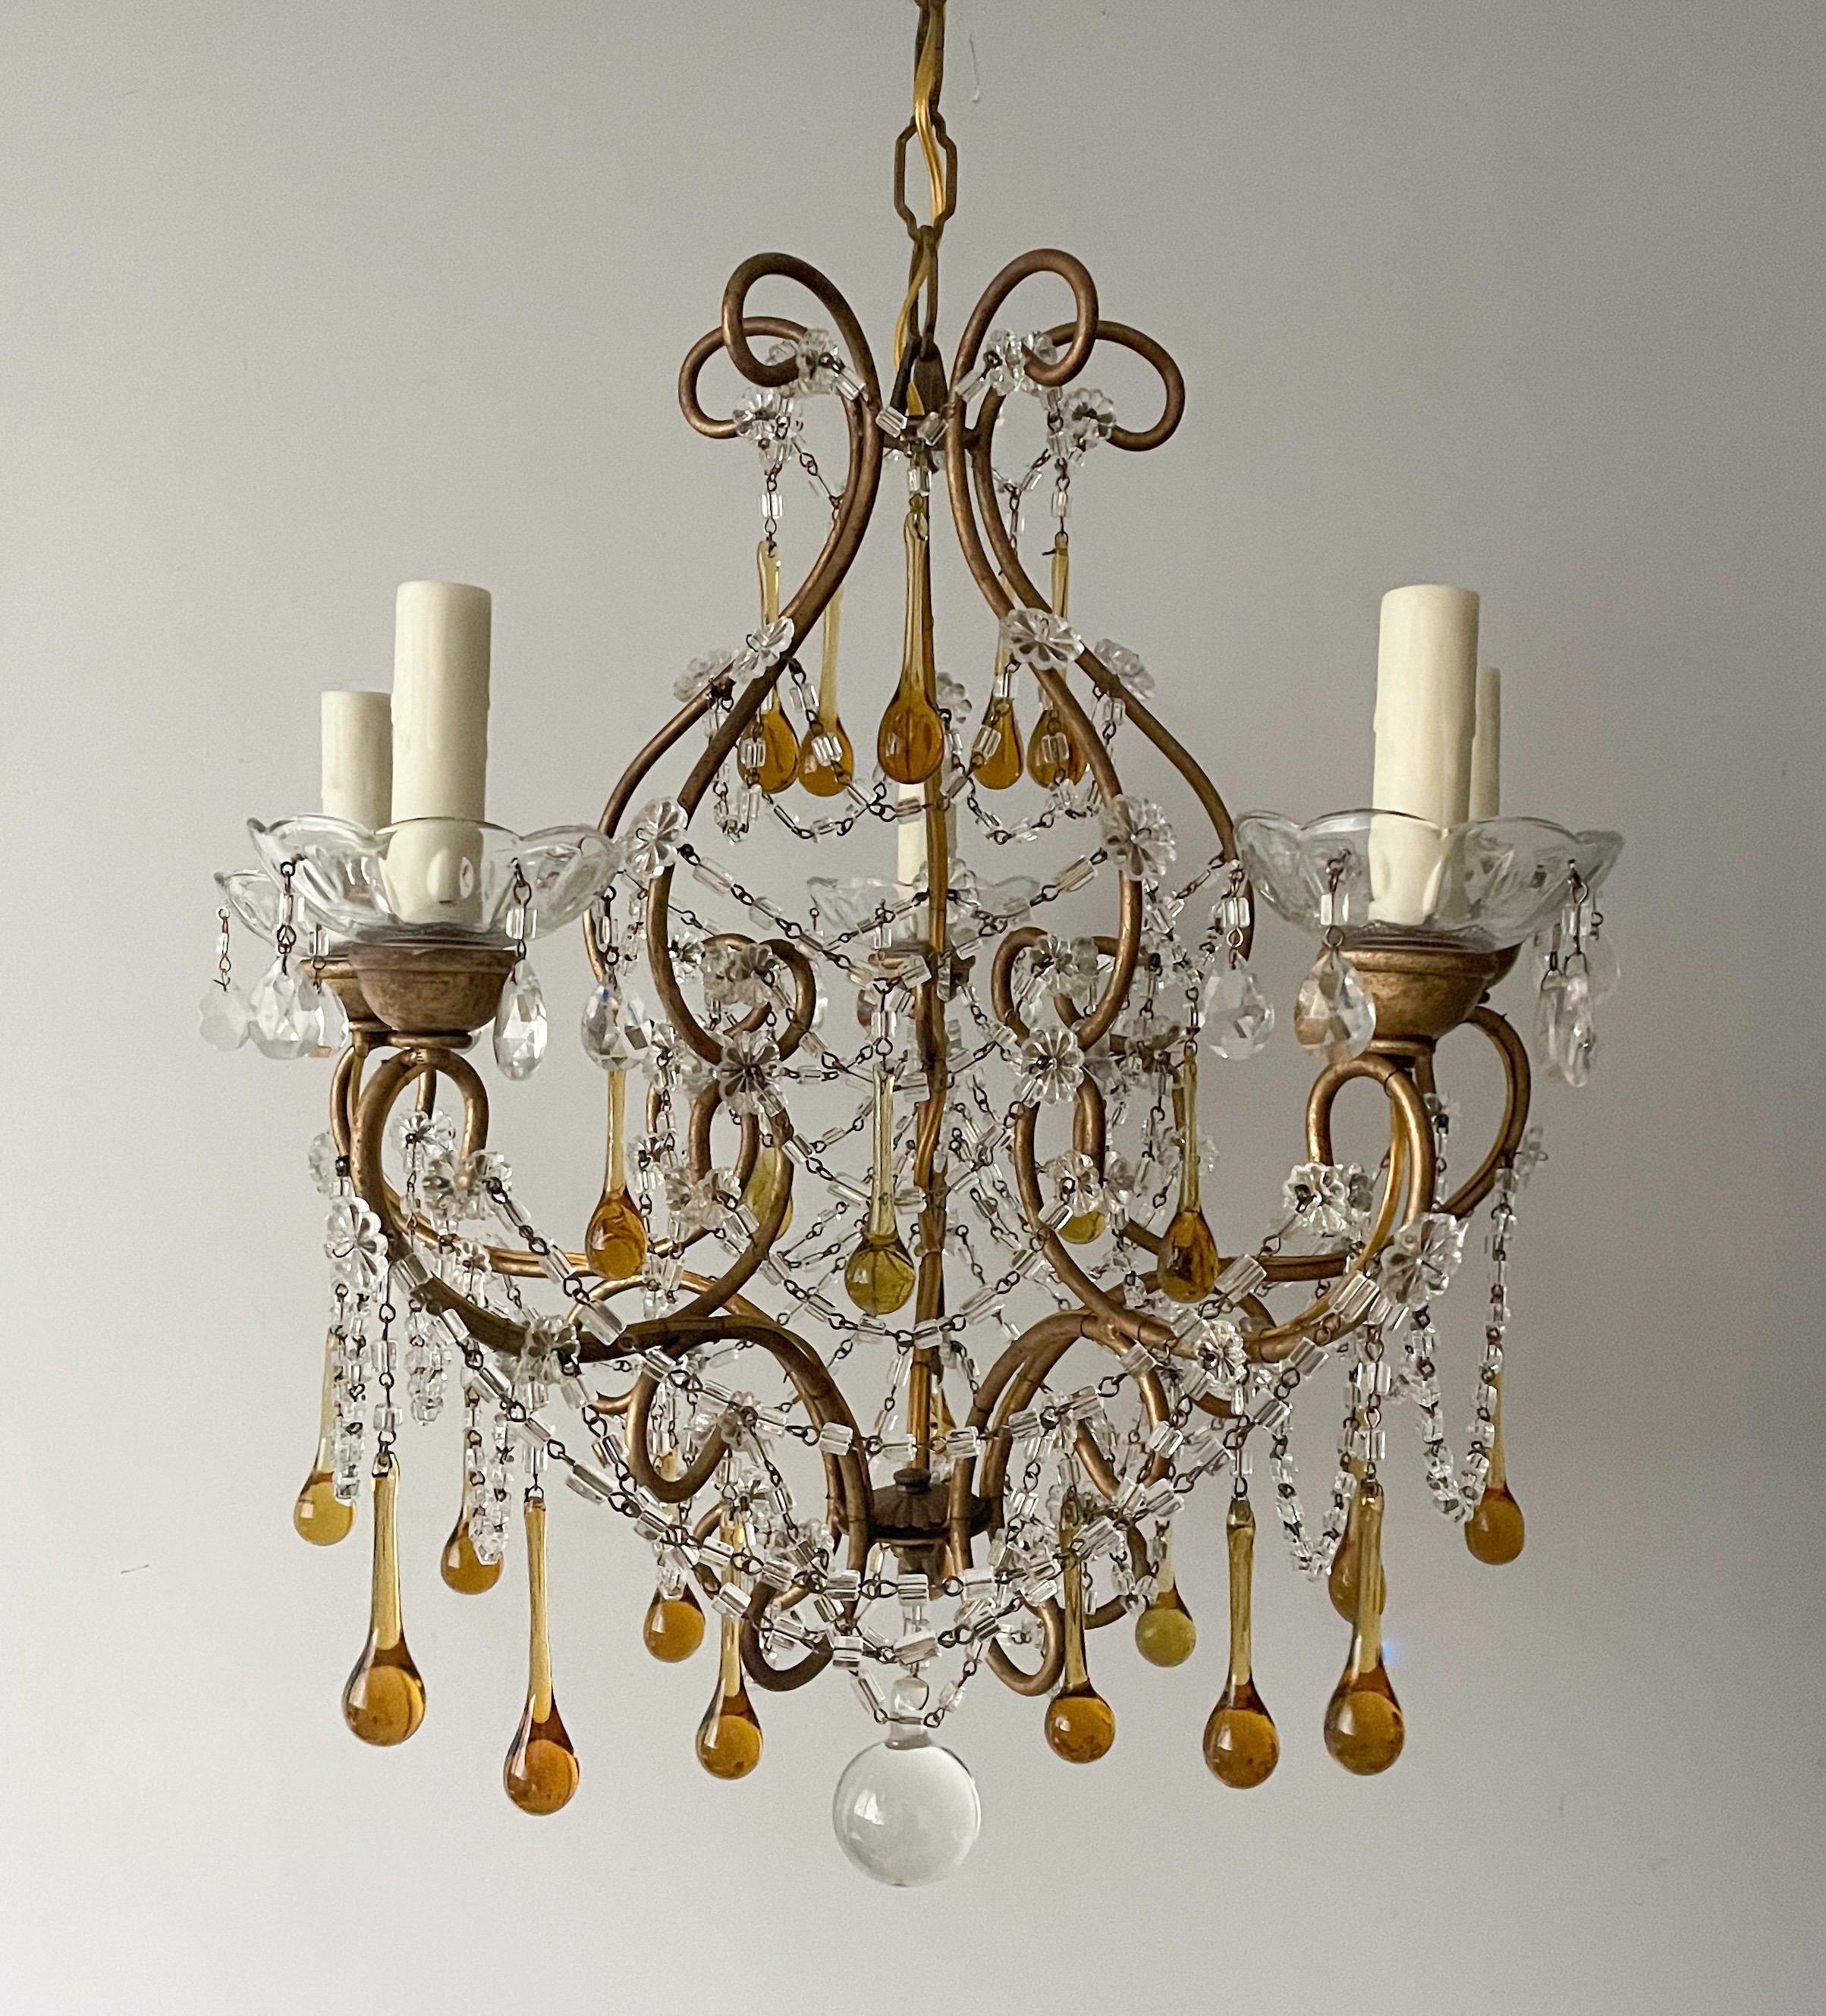 Gorgeous, vintage Italian gilt-iron and crystal beaded chandelier with Murano glass drops. 

The chandelier consists of a curvaceous gilded iron frame decorated crystal bead swags and Murano glass drops in a honey amber color. 

The chandelier is